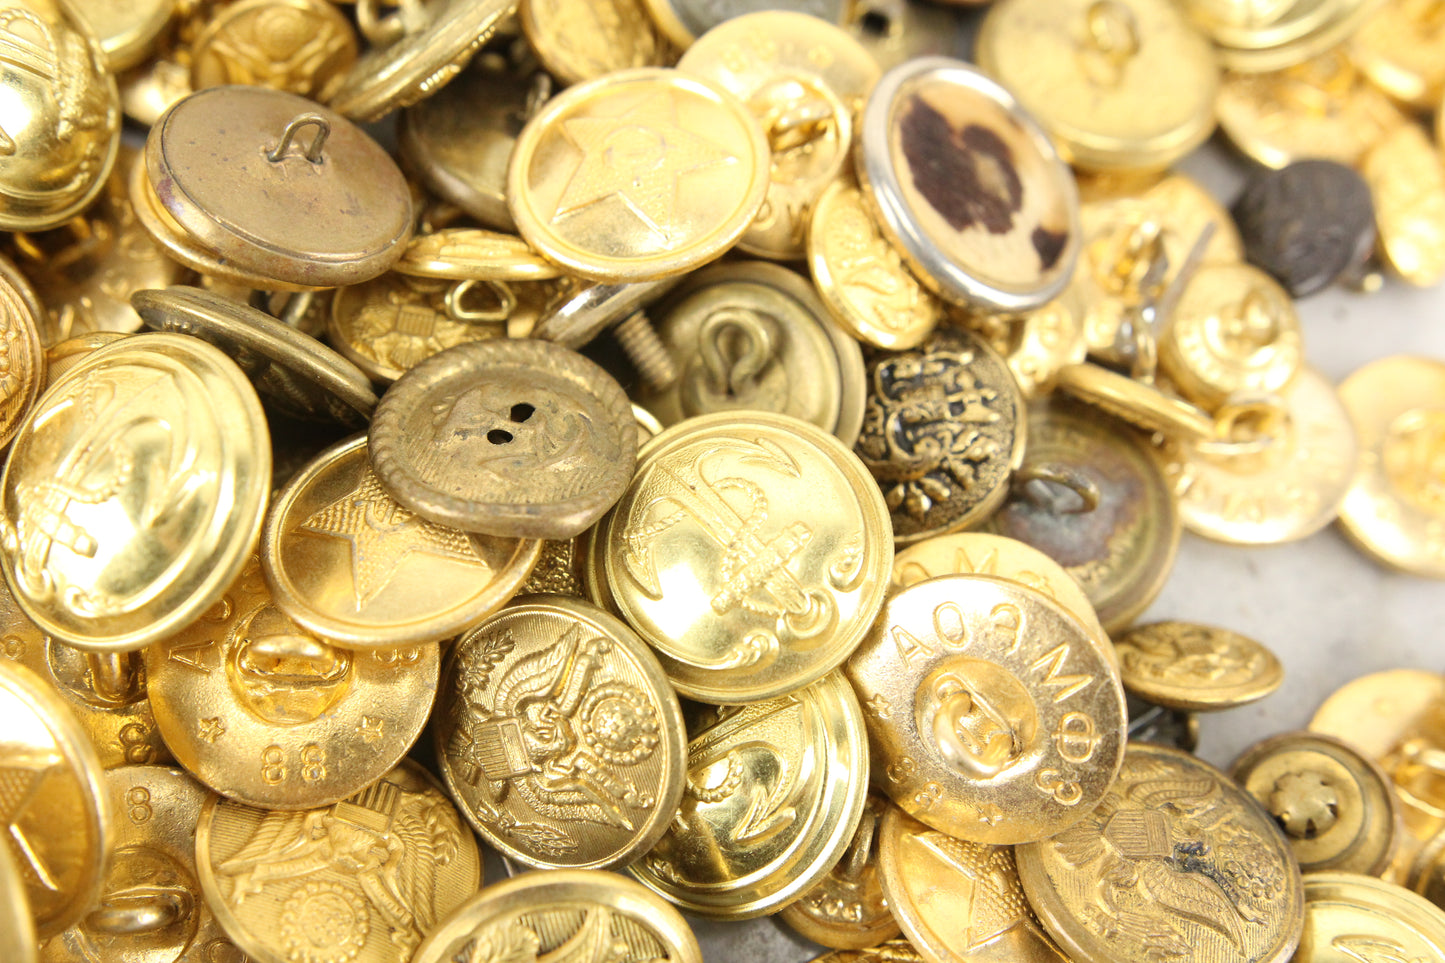 Assorted Vintage Military-Style Buttons